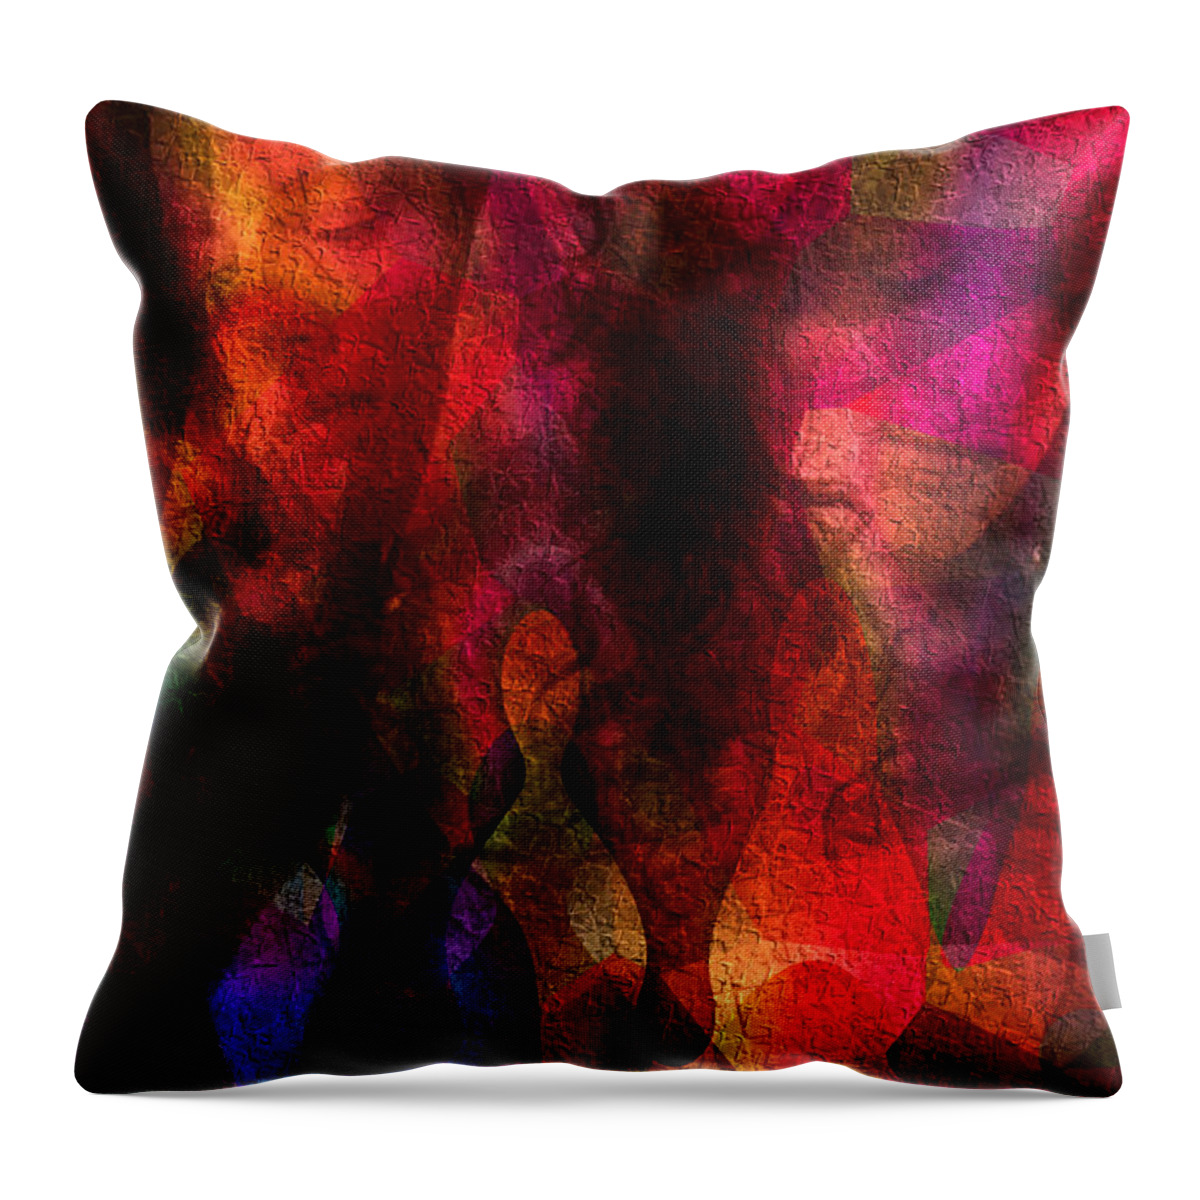 Moods In Abstract Throw Pillow featuring the digital art Moods in Abstract by Kiki Art